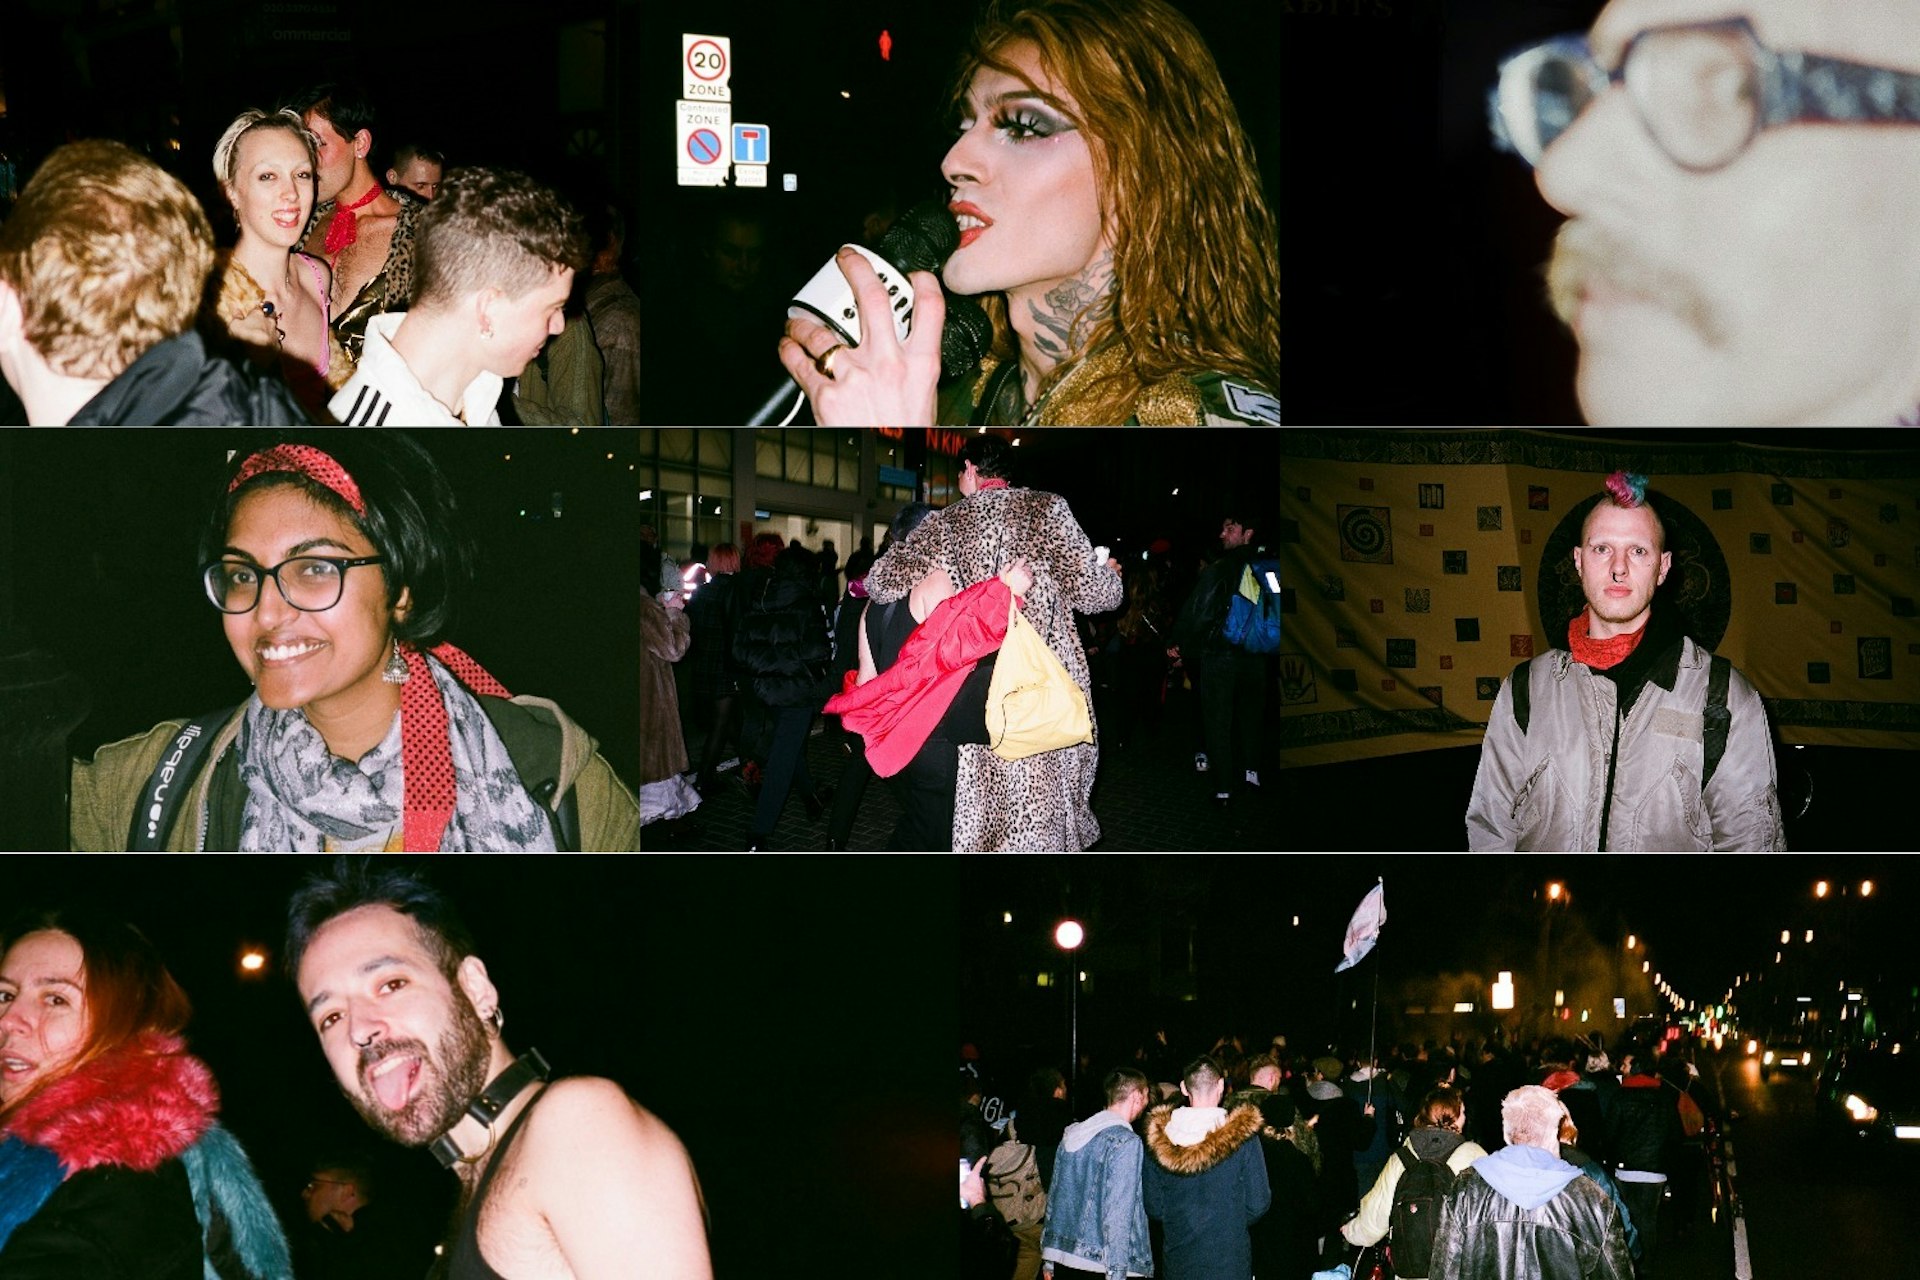 Somewhere to go: the fight for London’s queer spaces